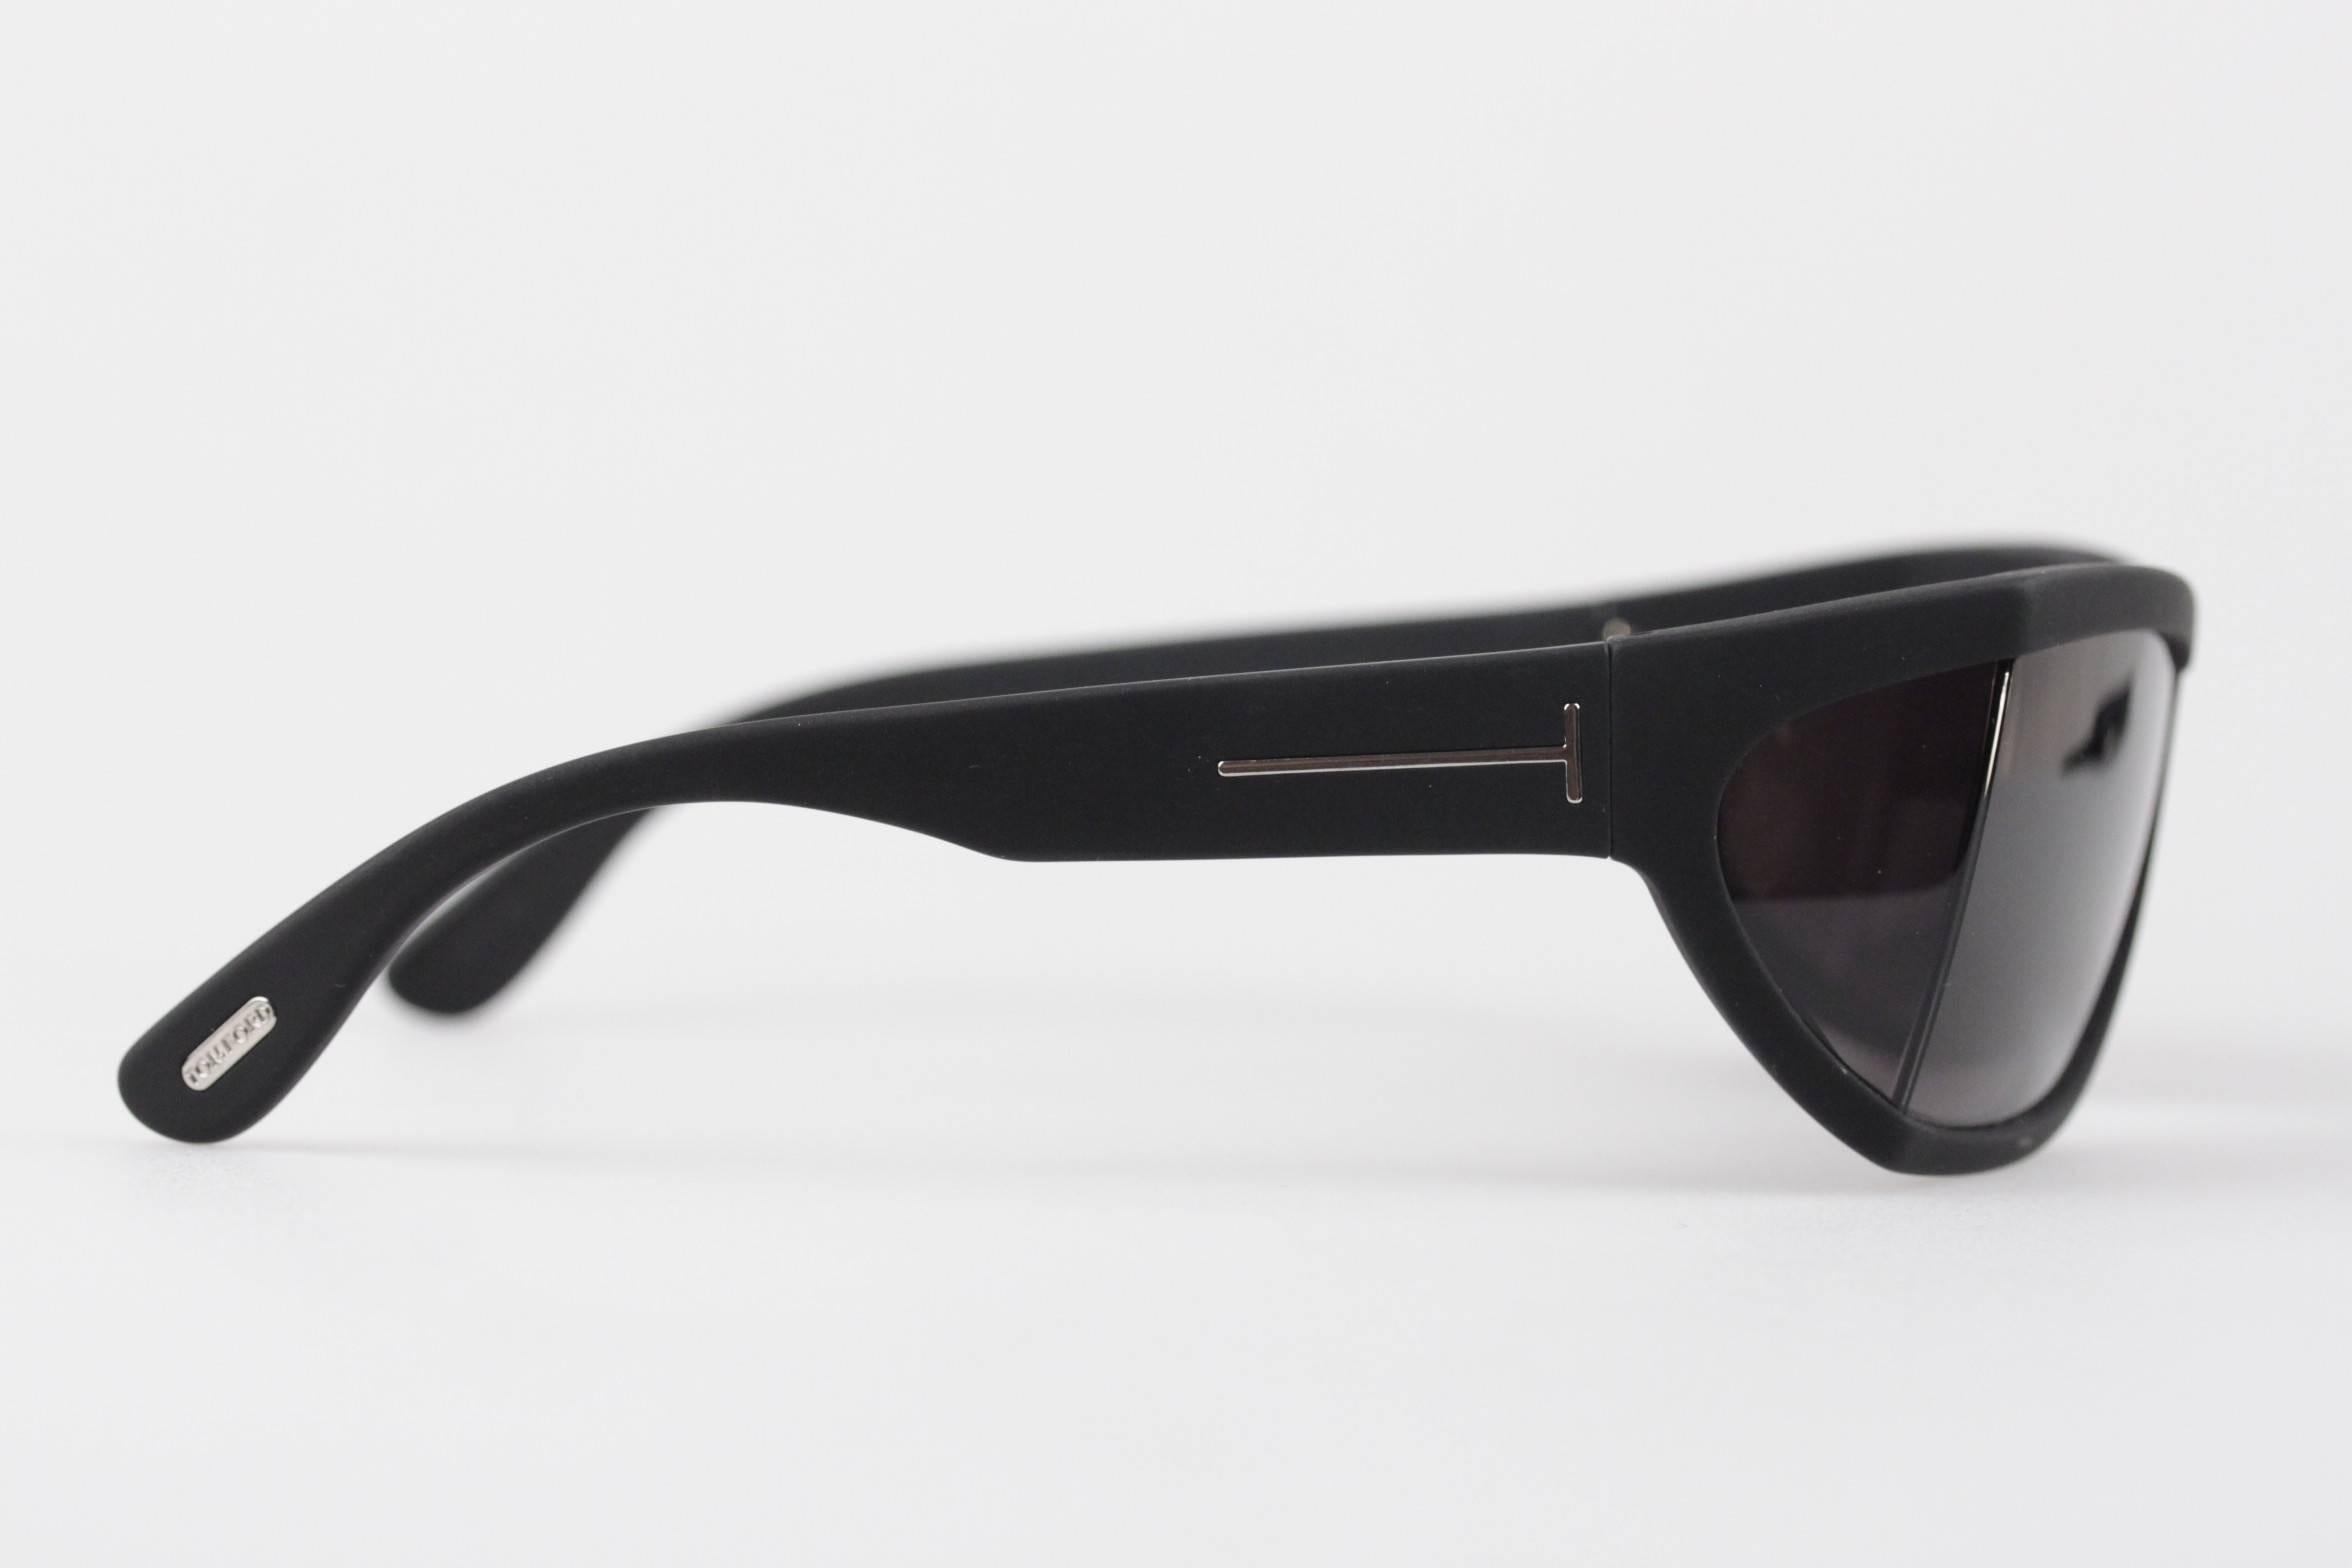 tom ford sunglasses with side shields